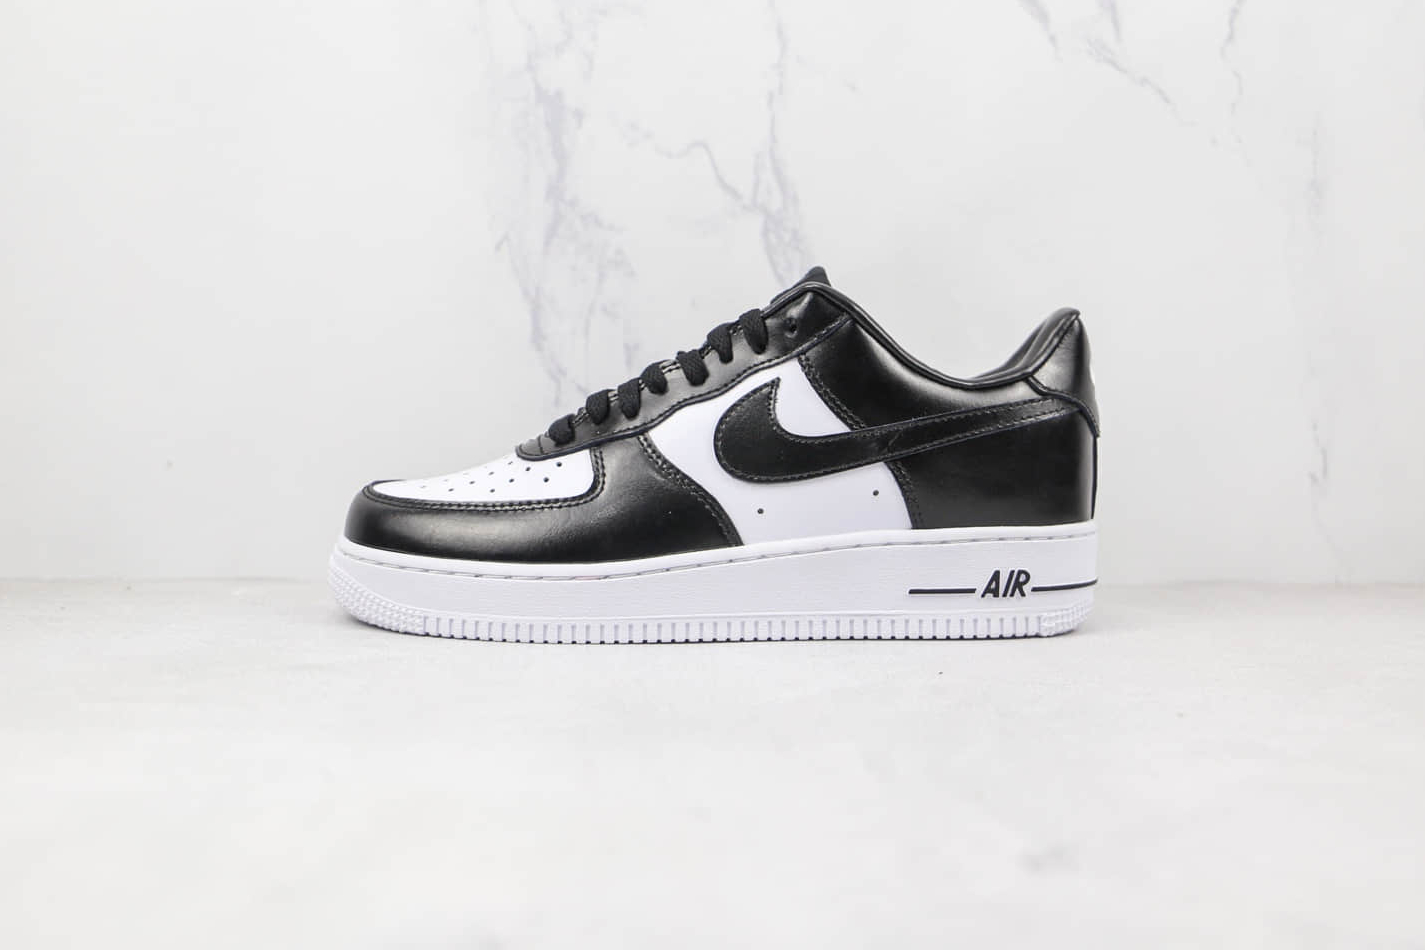 Nike Air Force 1 Low 'Tuxedo' AQ4134-100 - Classic Style with a Modern Twist